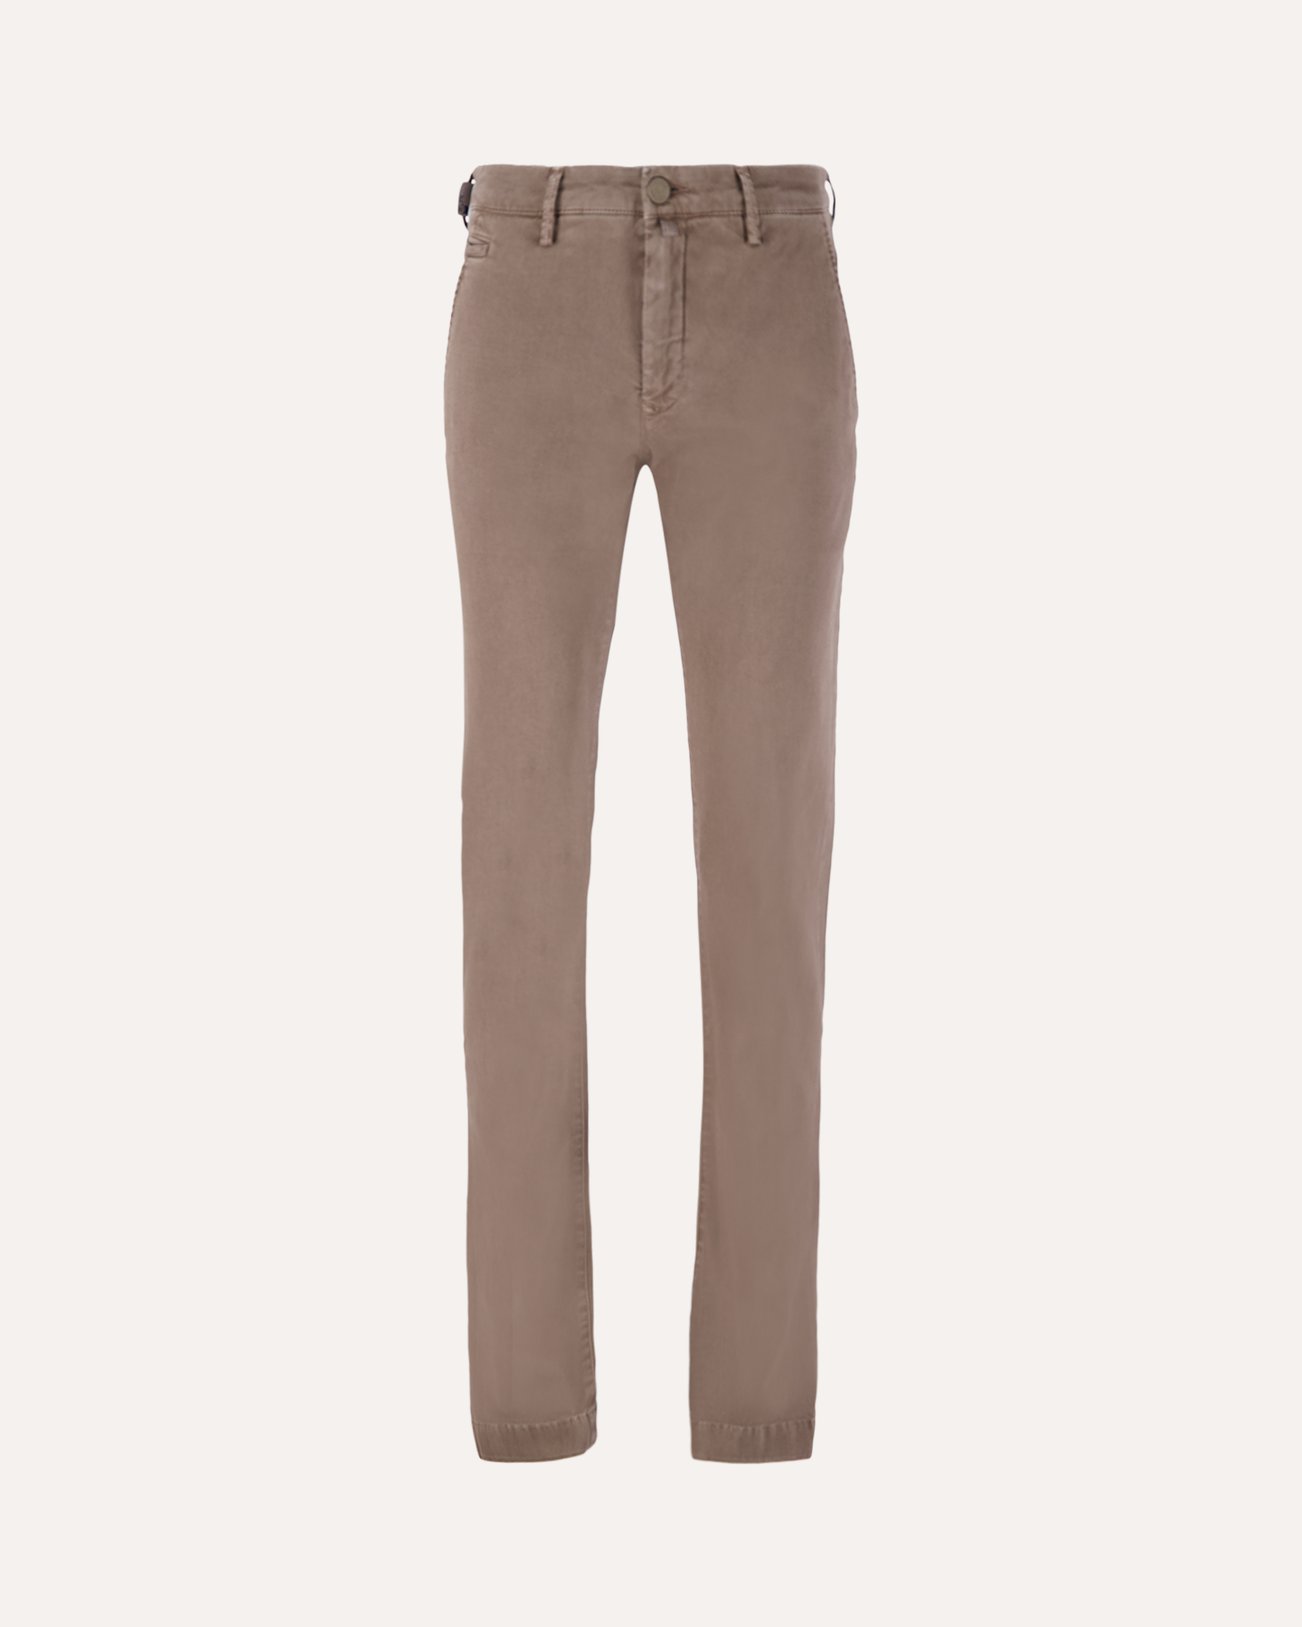 Jacob Cohen Bobby Chinos S3651 B75 BEIGE 1